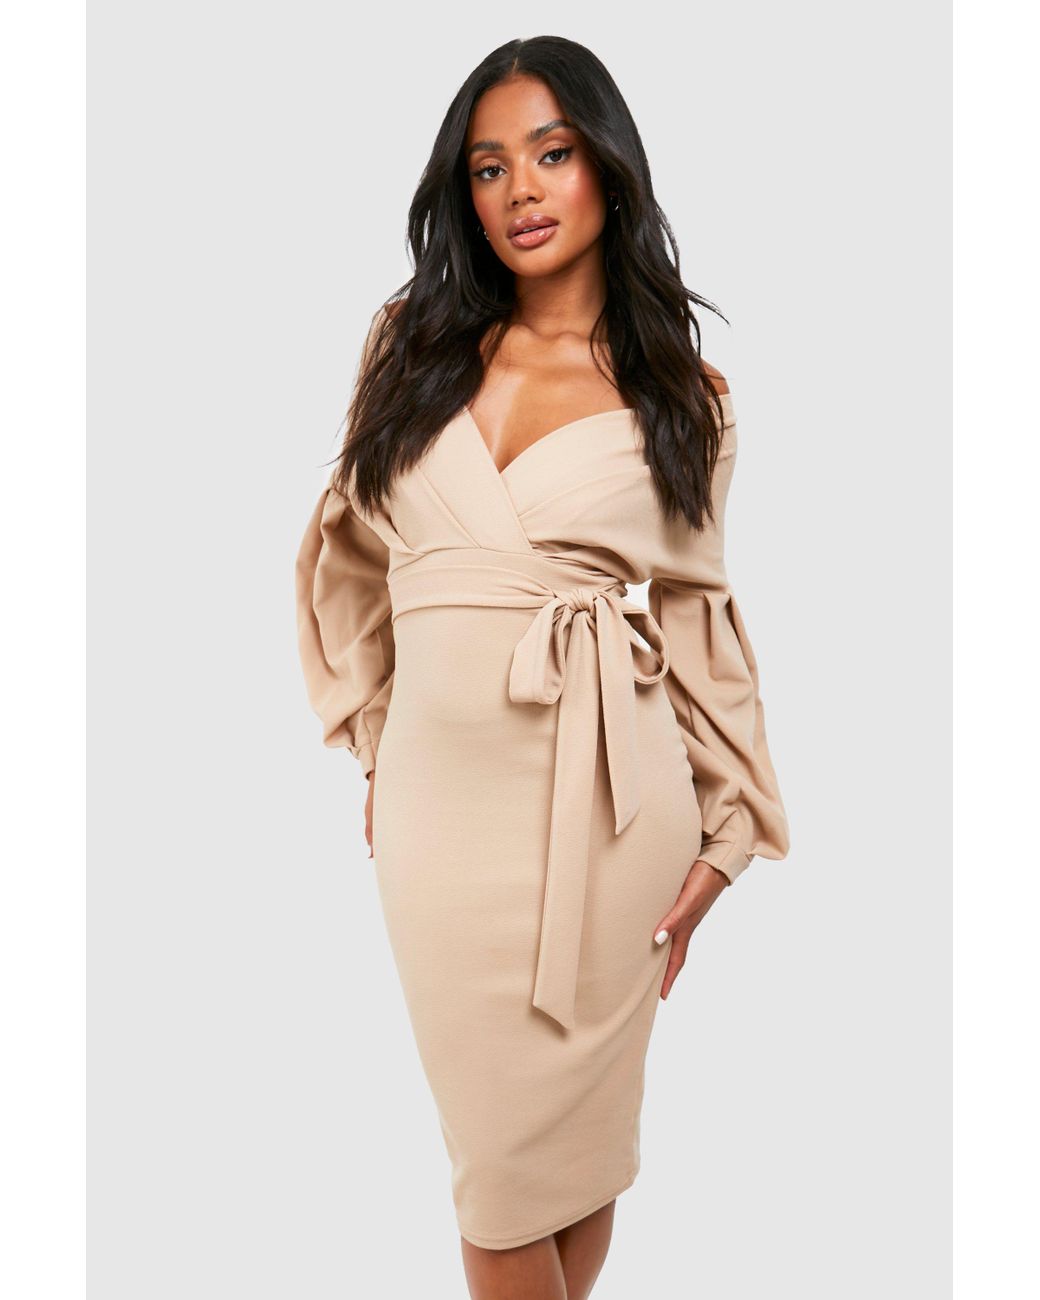 Boohoo Off The Shoulder Wrap Midi Dress in Natural | Lyst UK